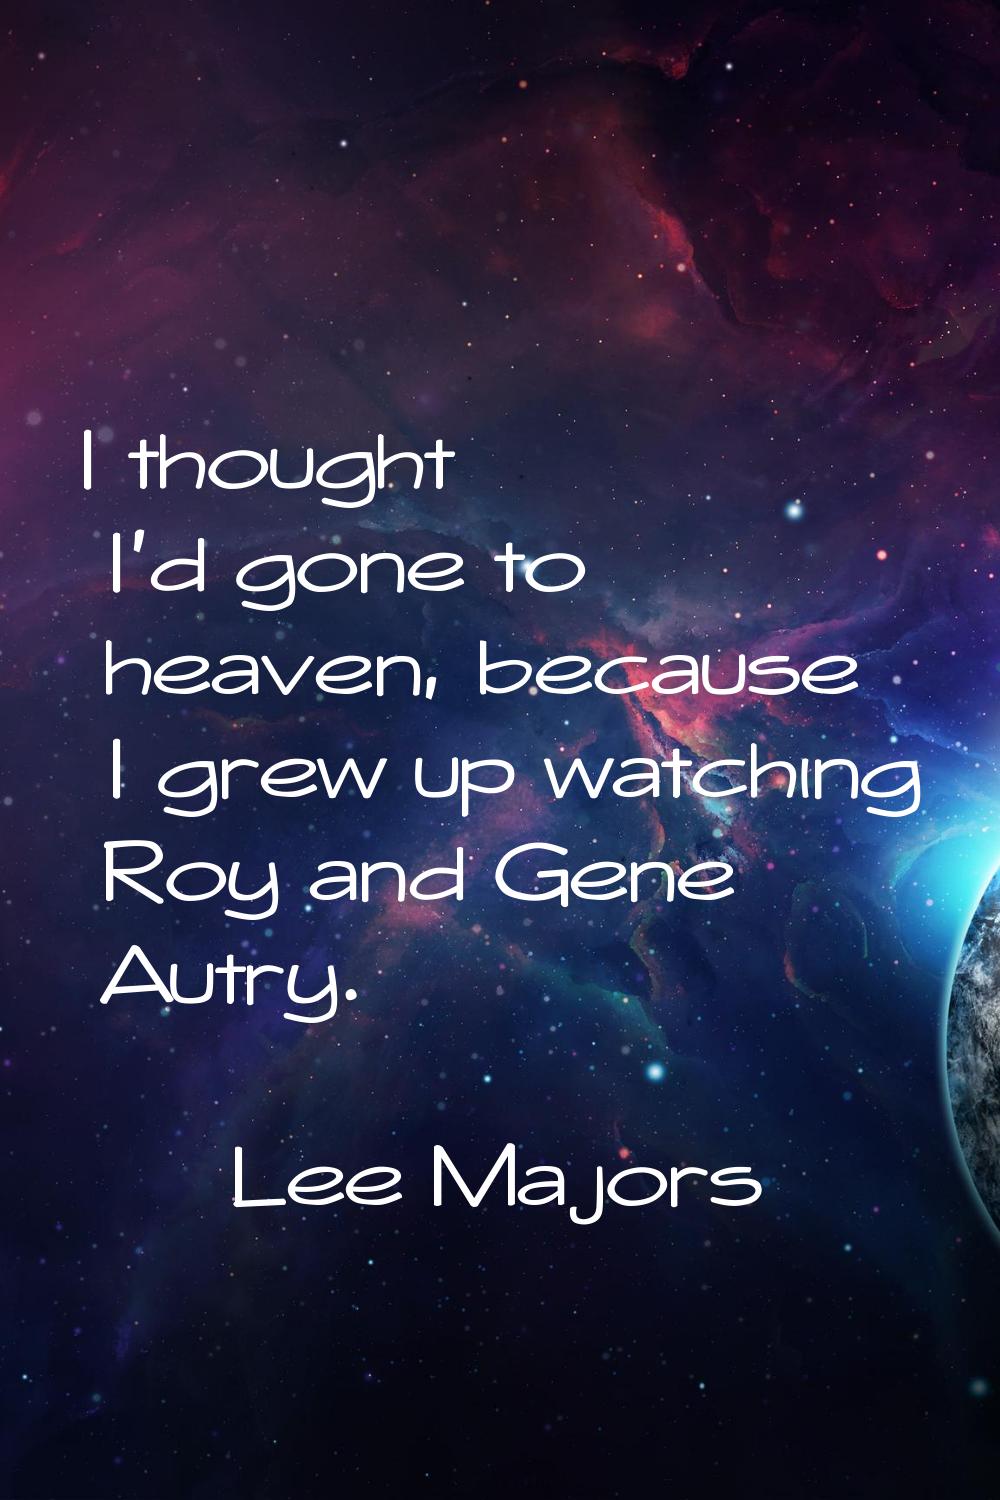 I thought I'd gone to heaven, because I grew up watching Roy and Gene Autry.